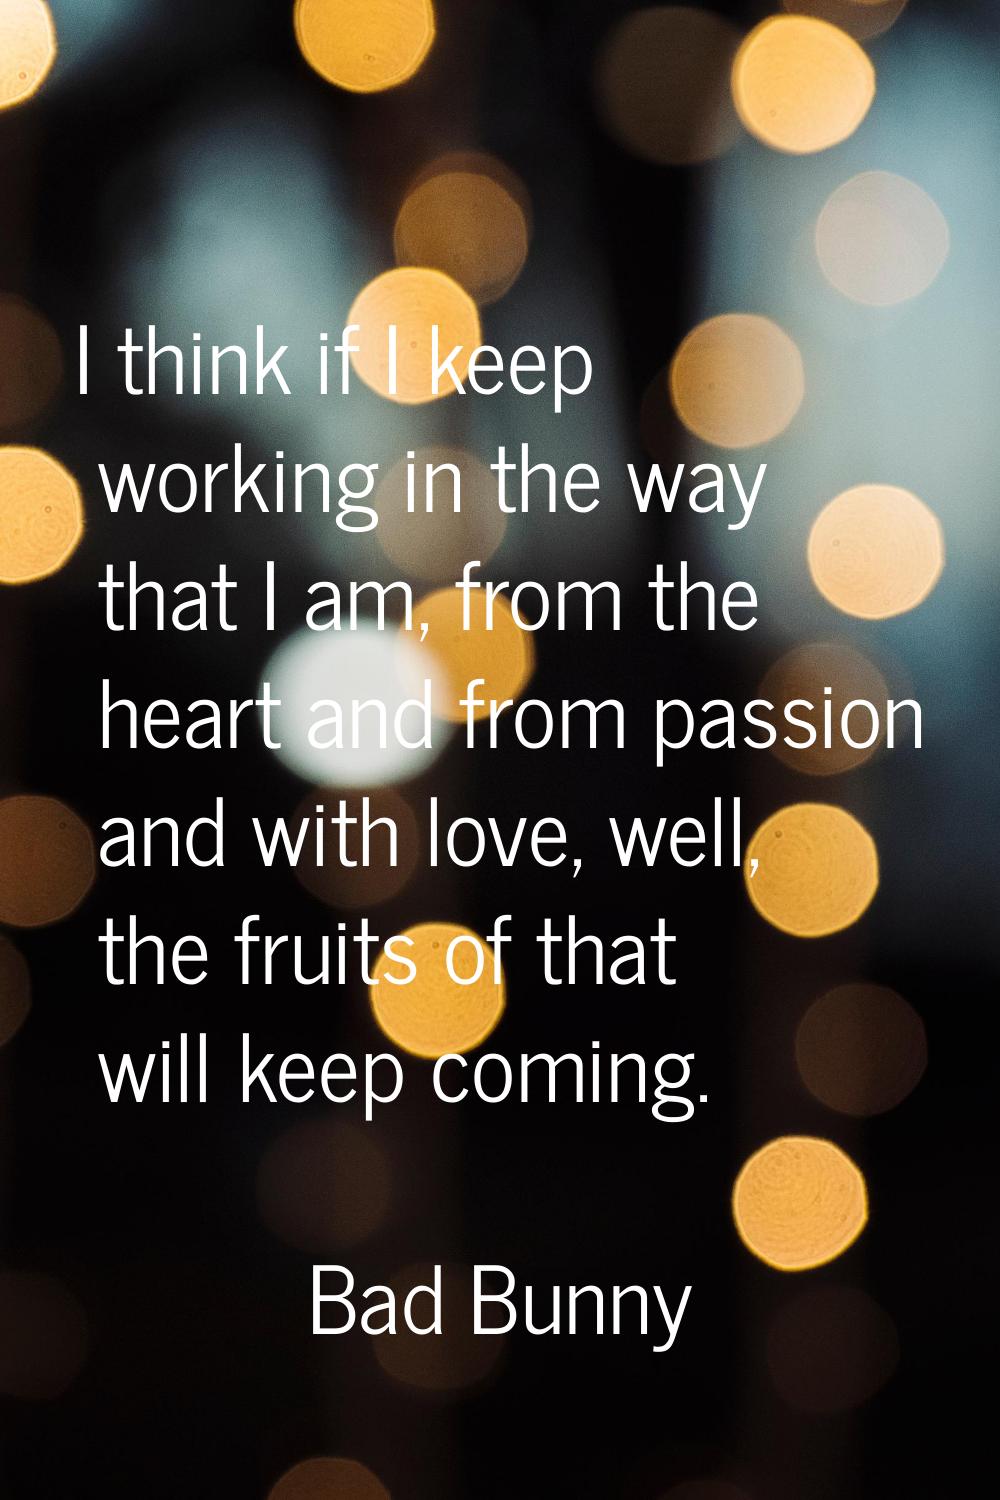 I think if I keep working in the way that I am, from the heart and from passion and with love, well